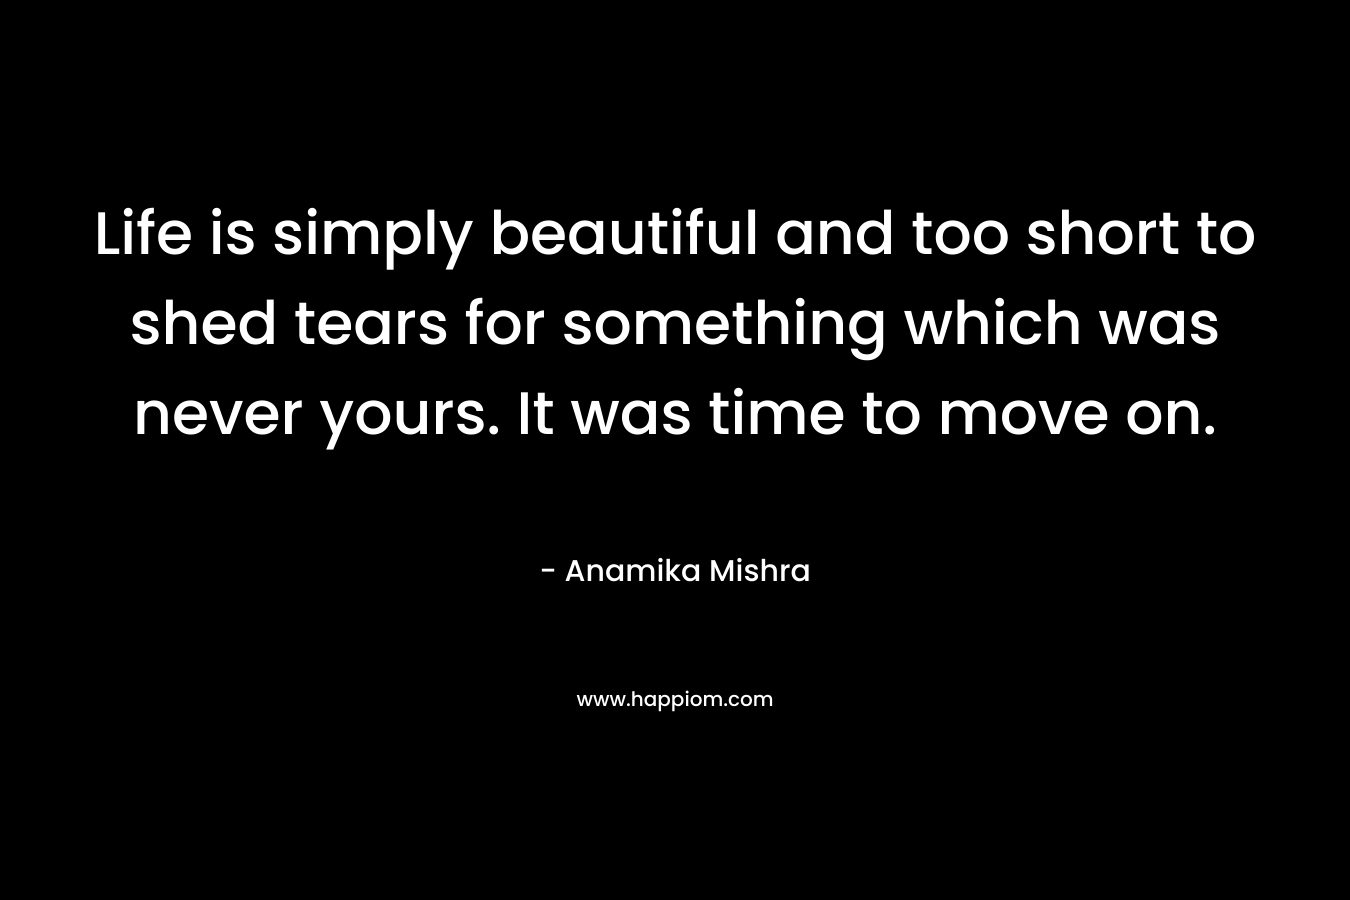 Life is simply beautiful and too short to shed tears for something which was never yours. It was time to move on.